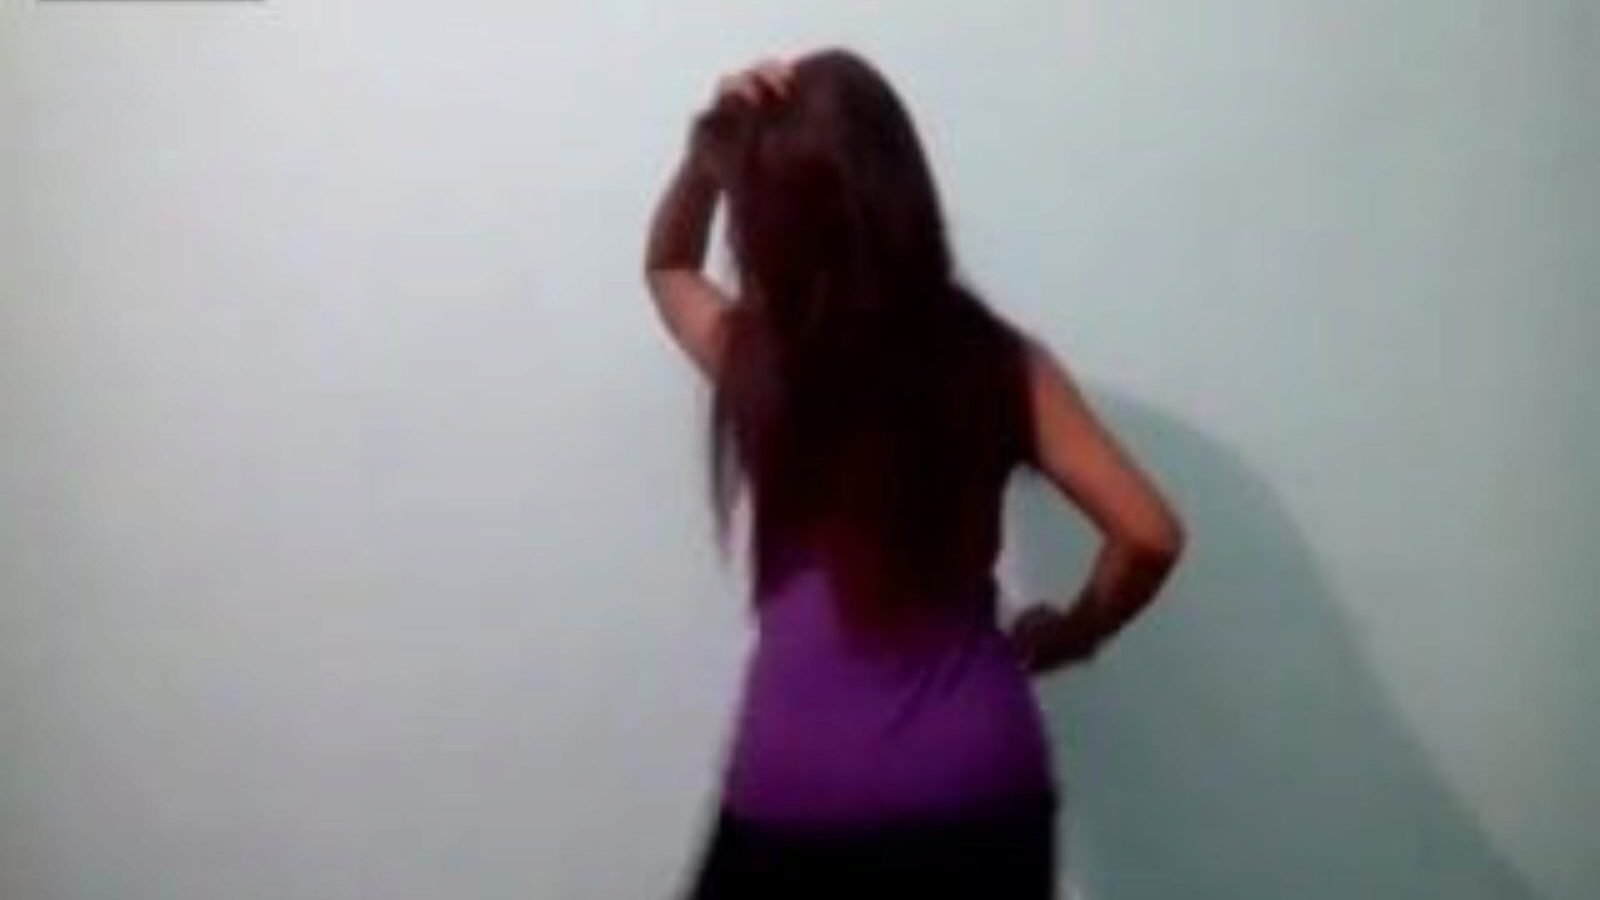 Telugu Lover Andhra Nude Dance, Free Indian Porn Video a4 Watch Telugu Lover Andhra Nude Dance video on xHamster, the superlatively good fuck-a-thon tube website with tons of free-for-all Indian American Dad Nude & Malayalam porno clips